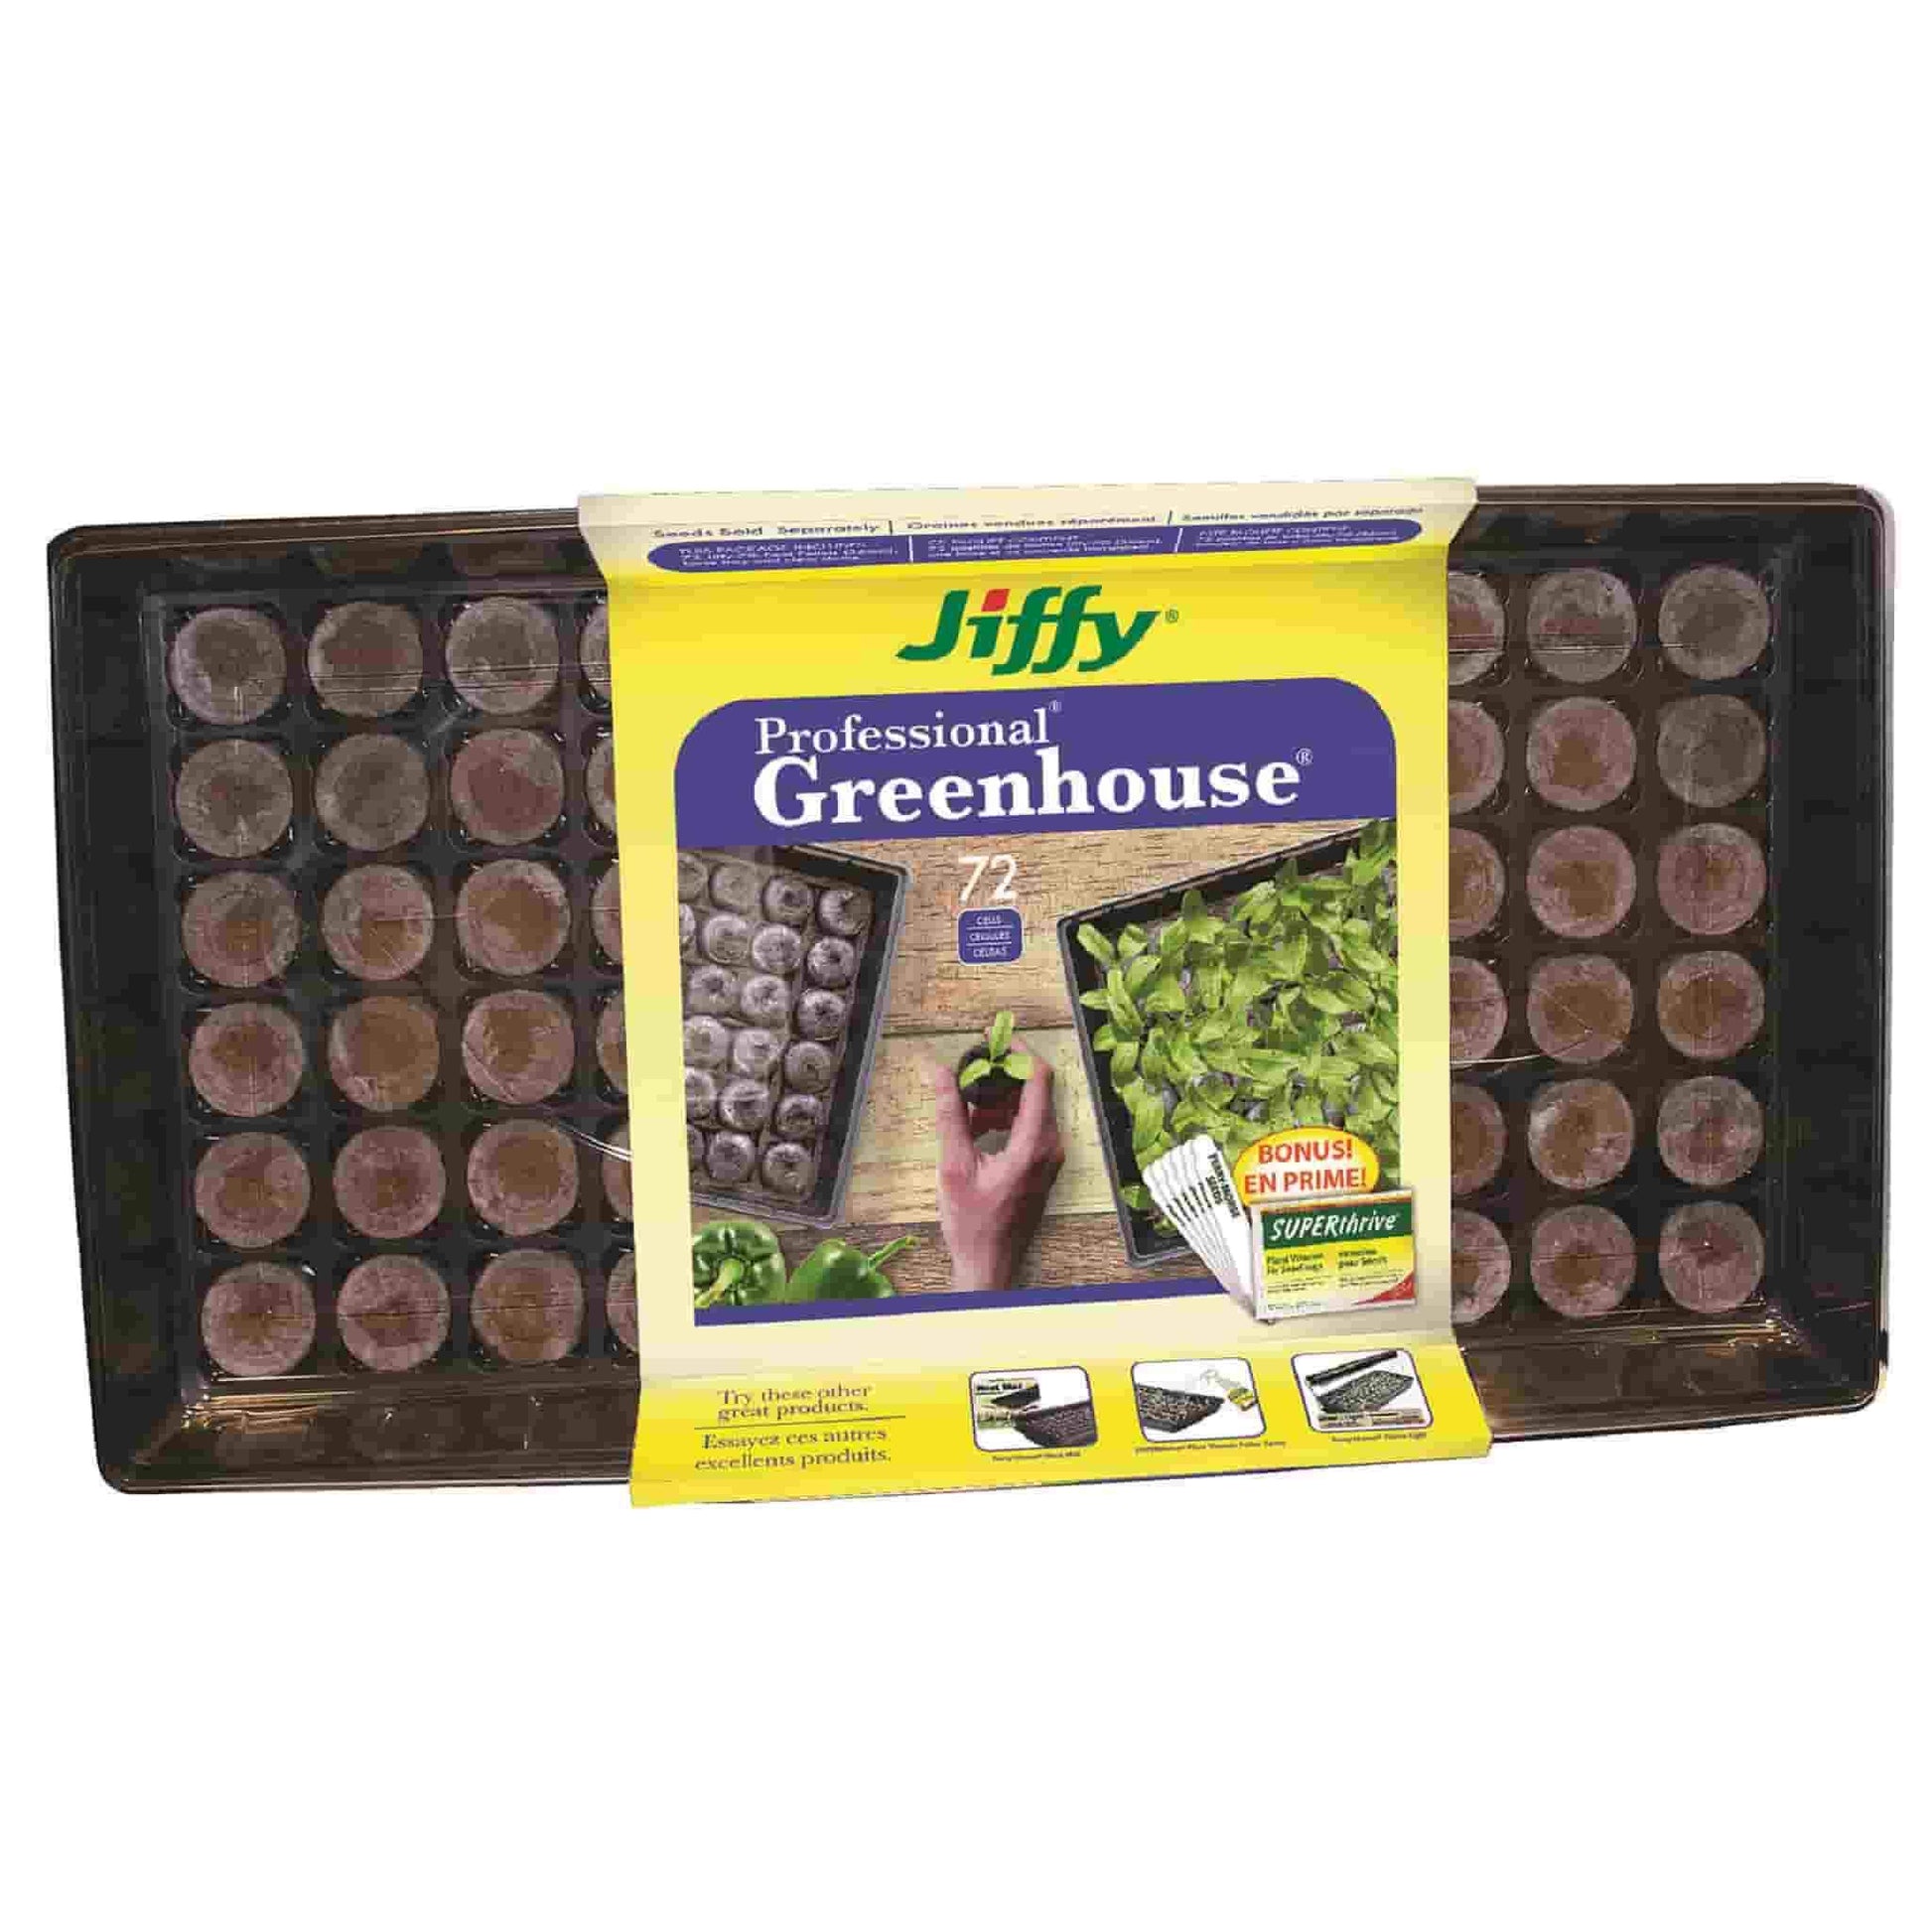 Jiffy 72 Pellet Professional Greenhouse with SUPERthrive